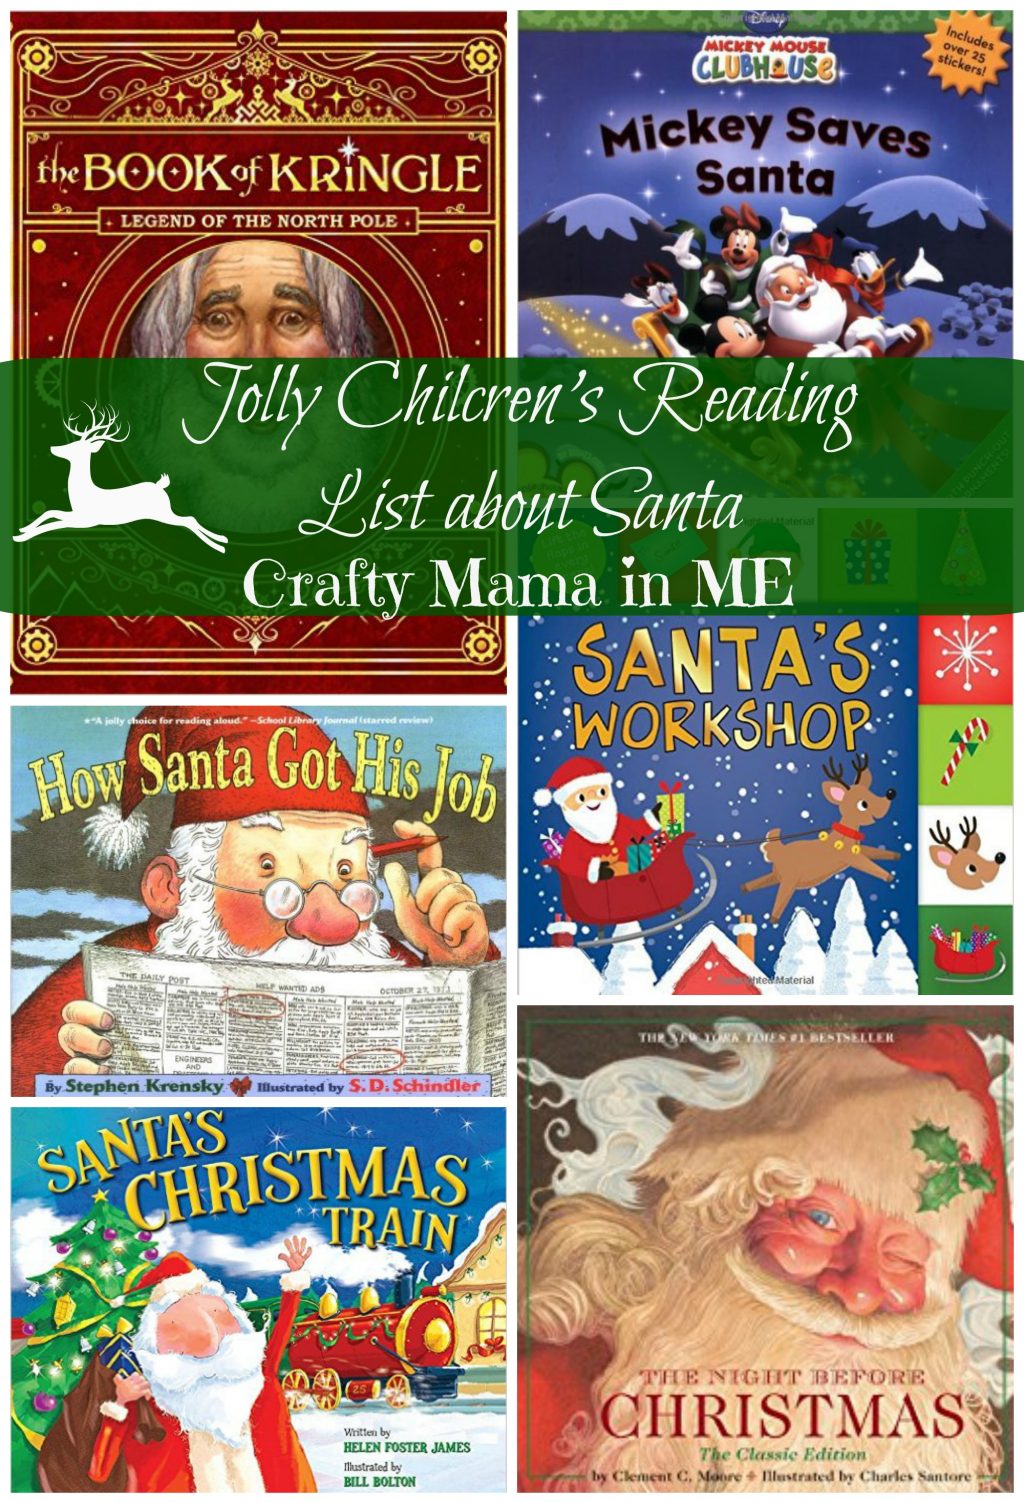 Jolly Children's Reading List of books about Santa